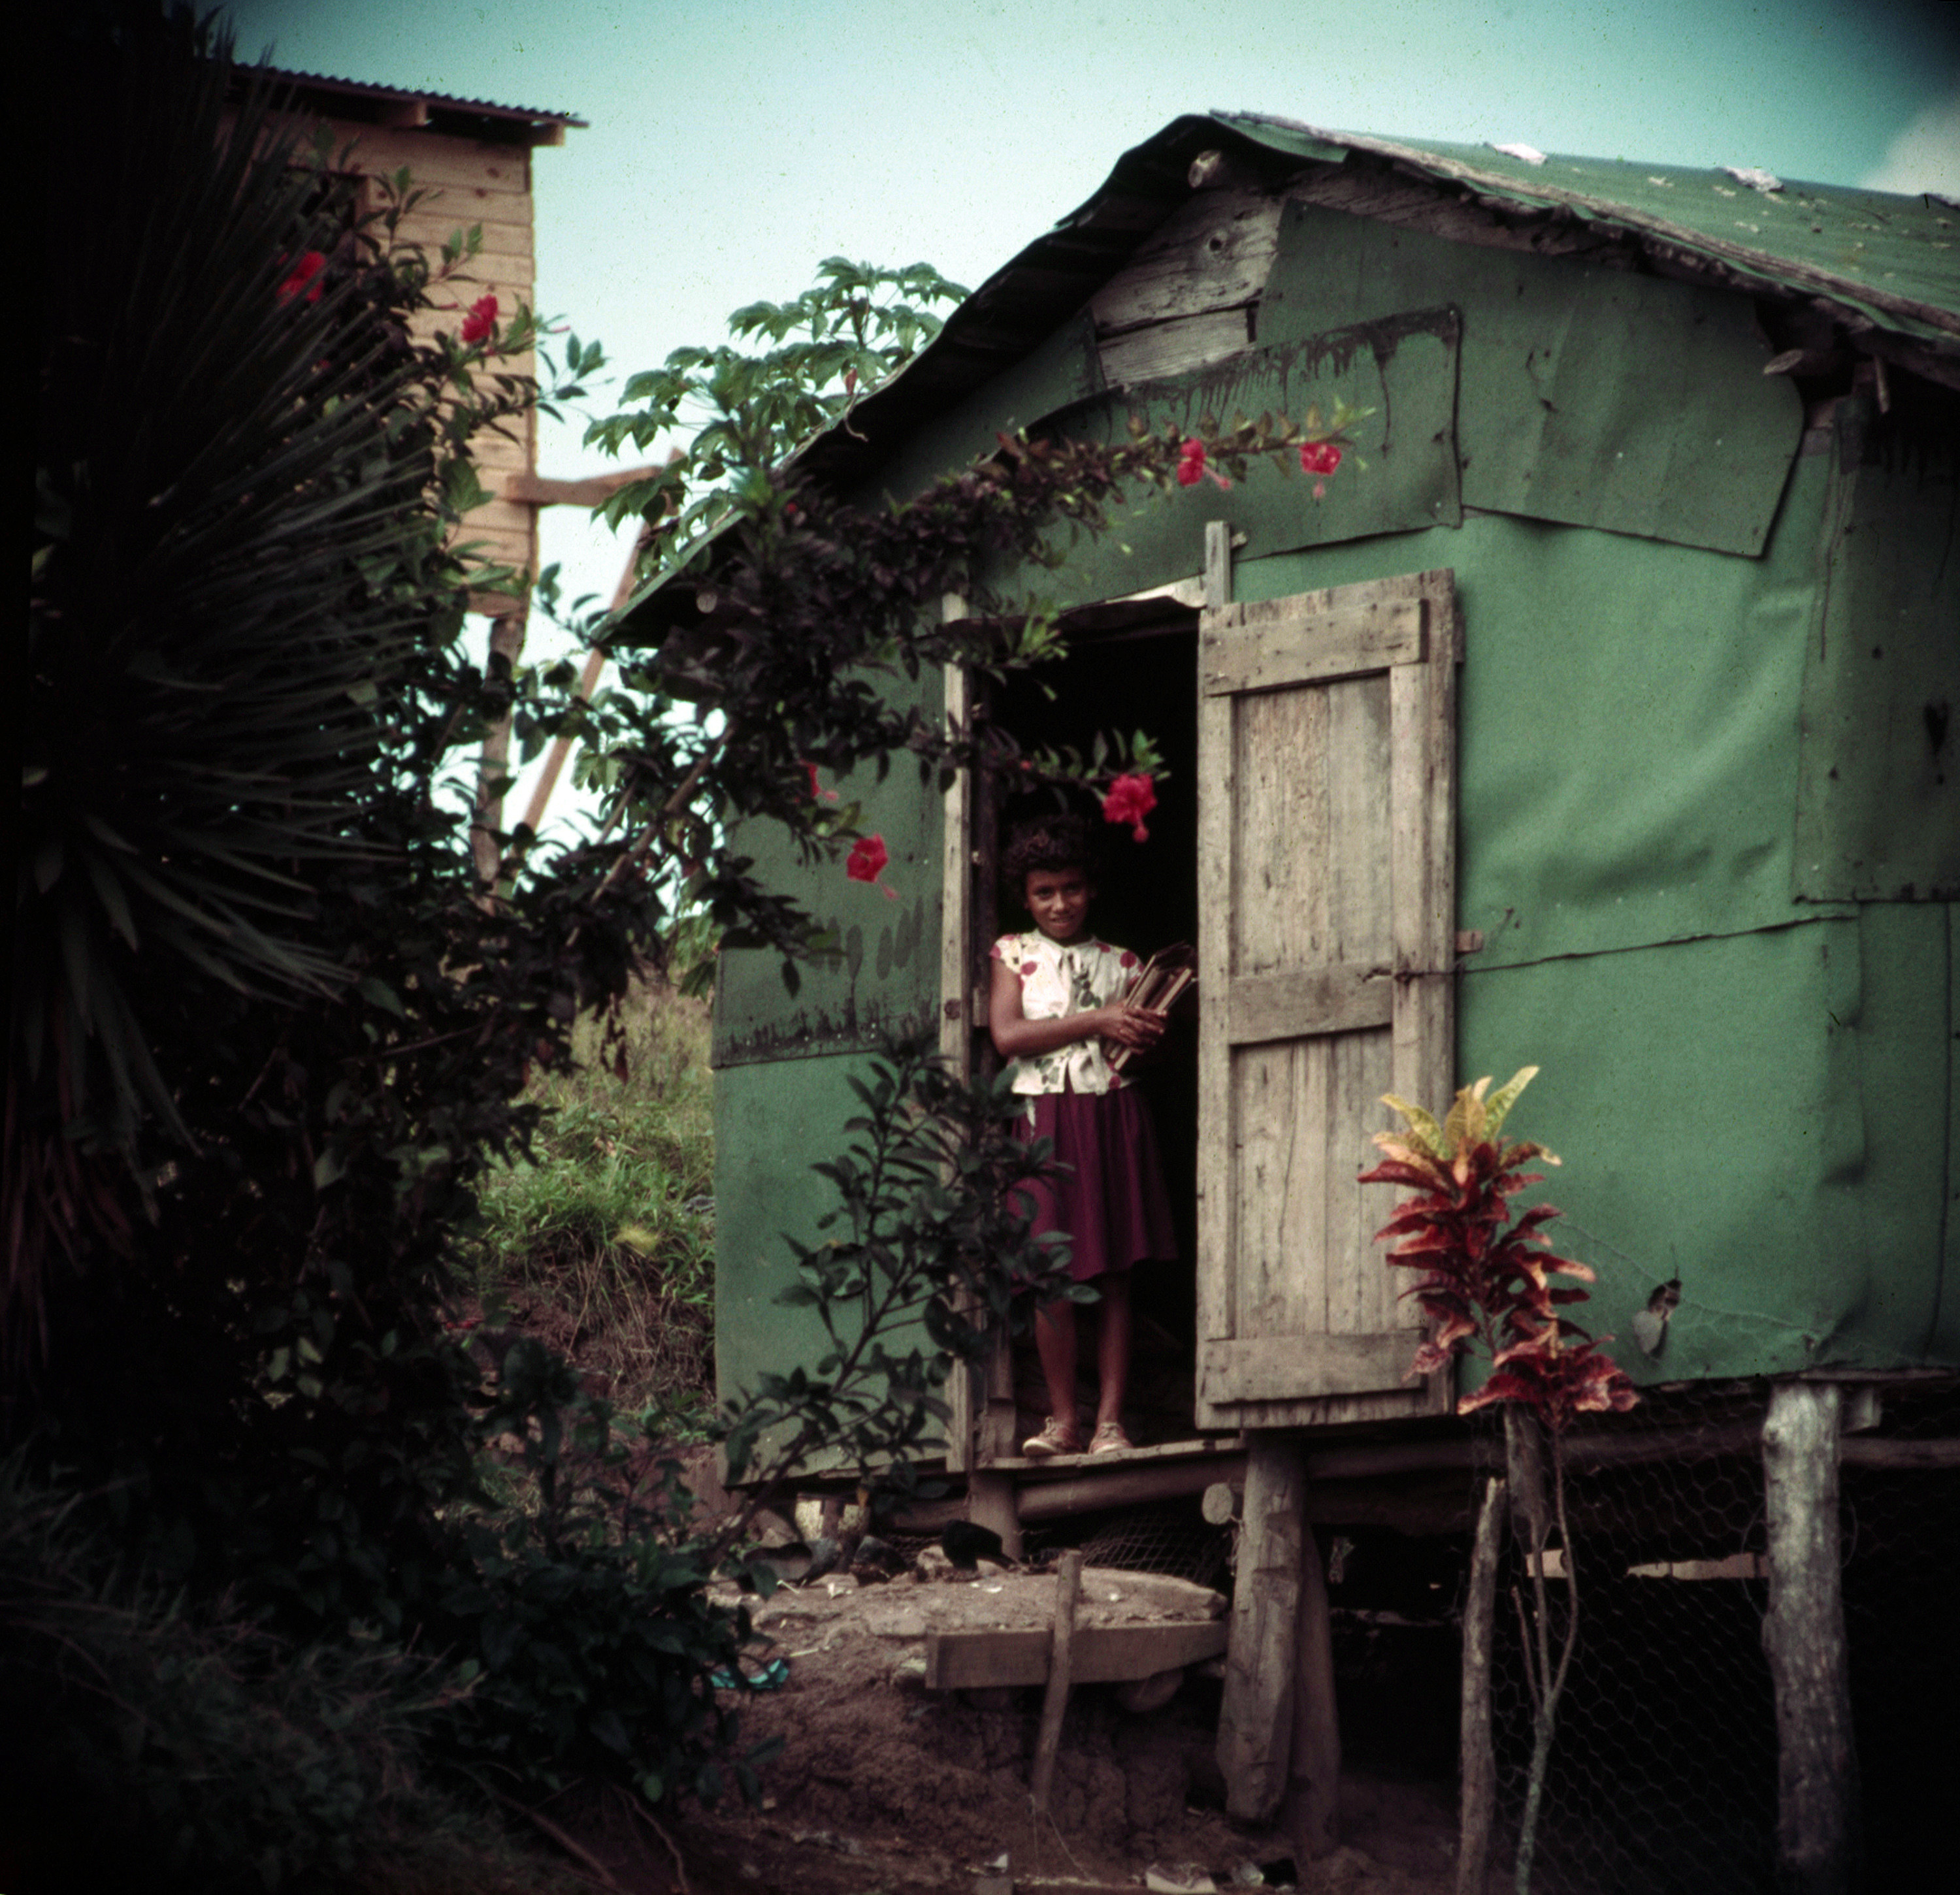 A young girl holding books at the entrance of a raised shack in Puerto Rico